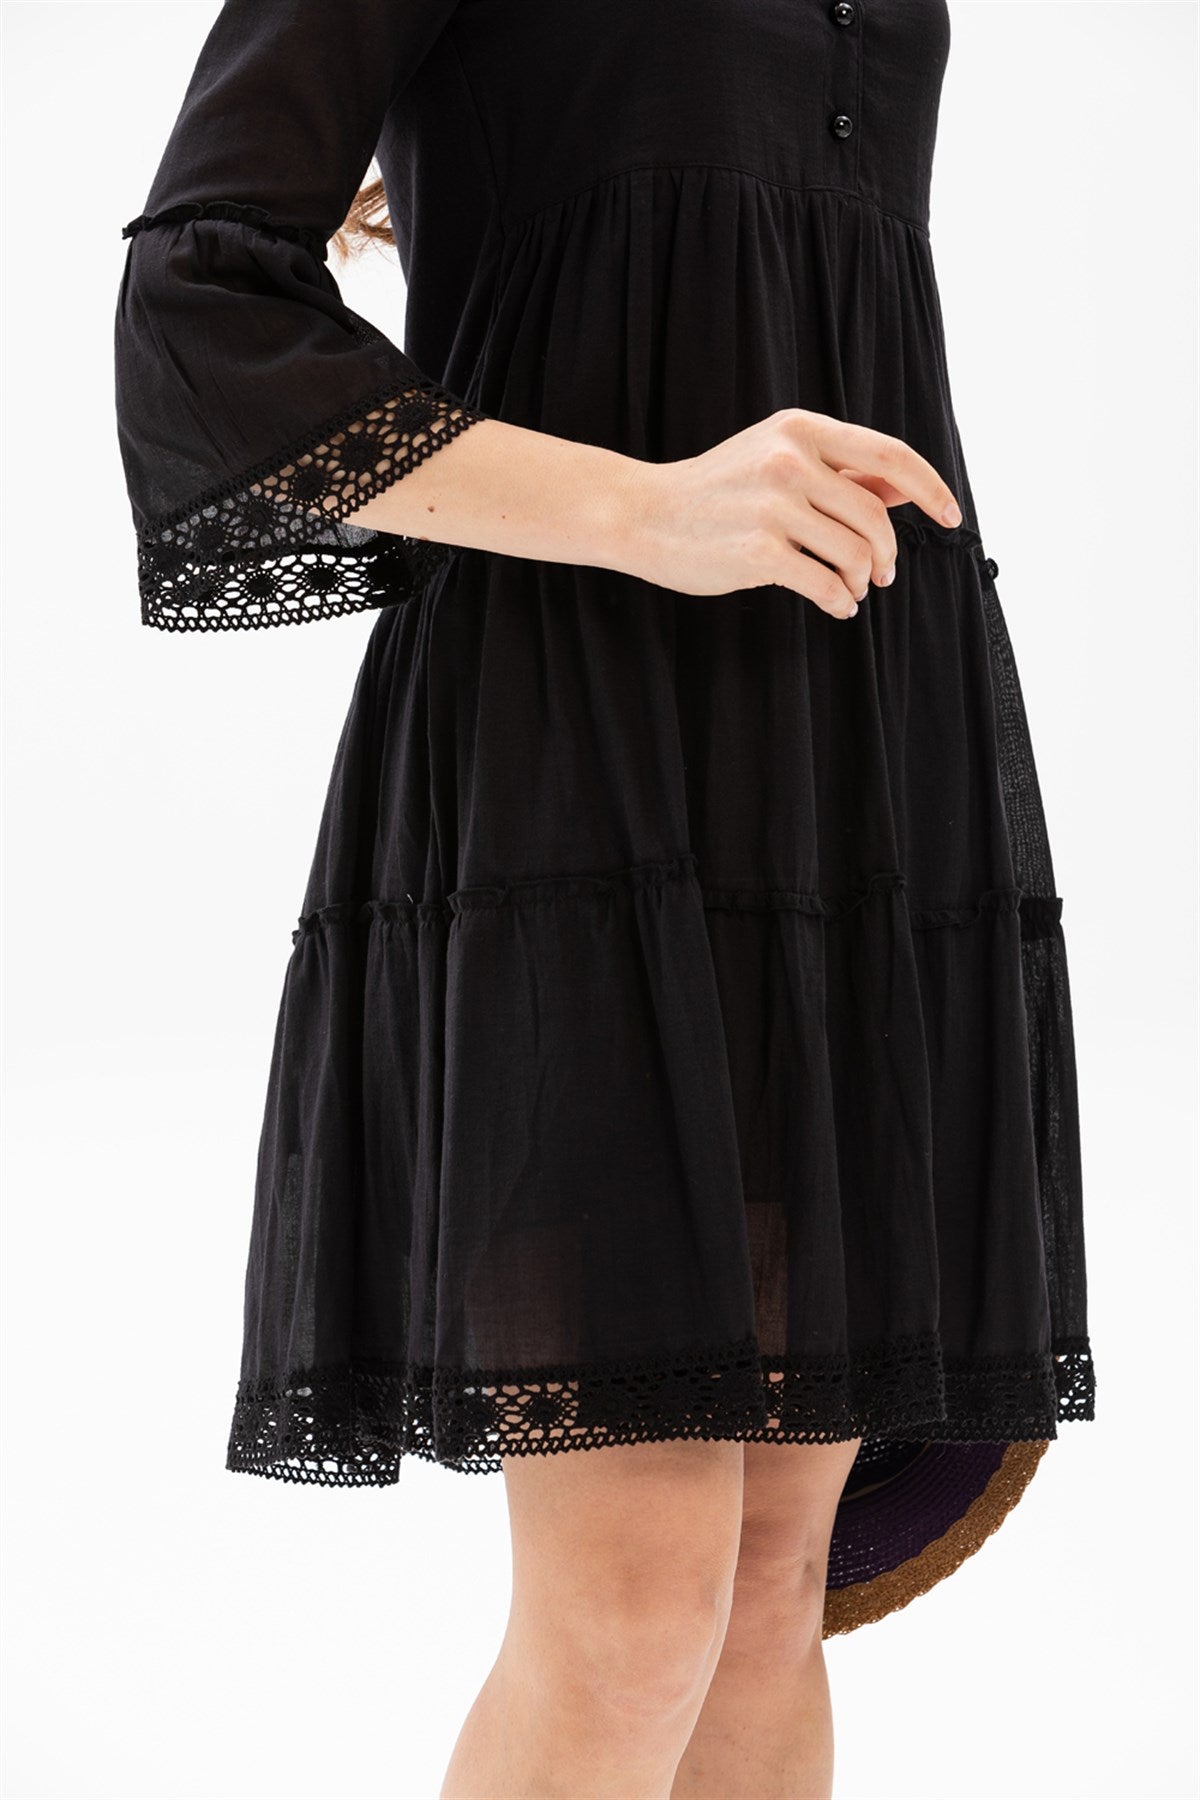 Trojan Sleeve Voile Dress with Guipure Lace Details